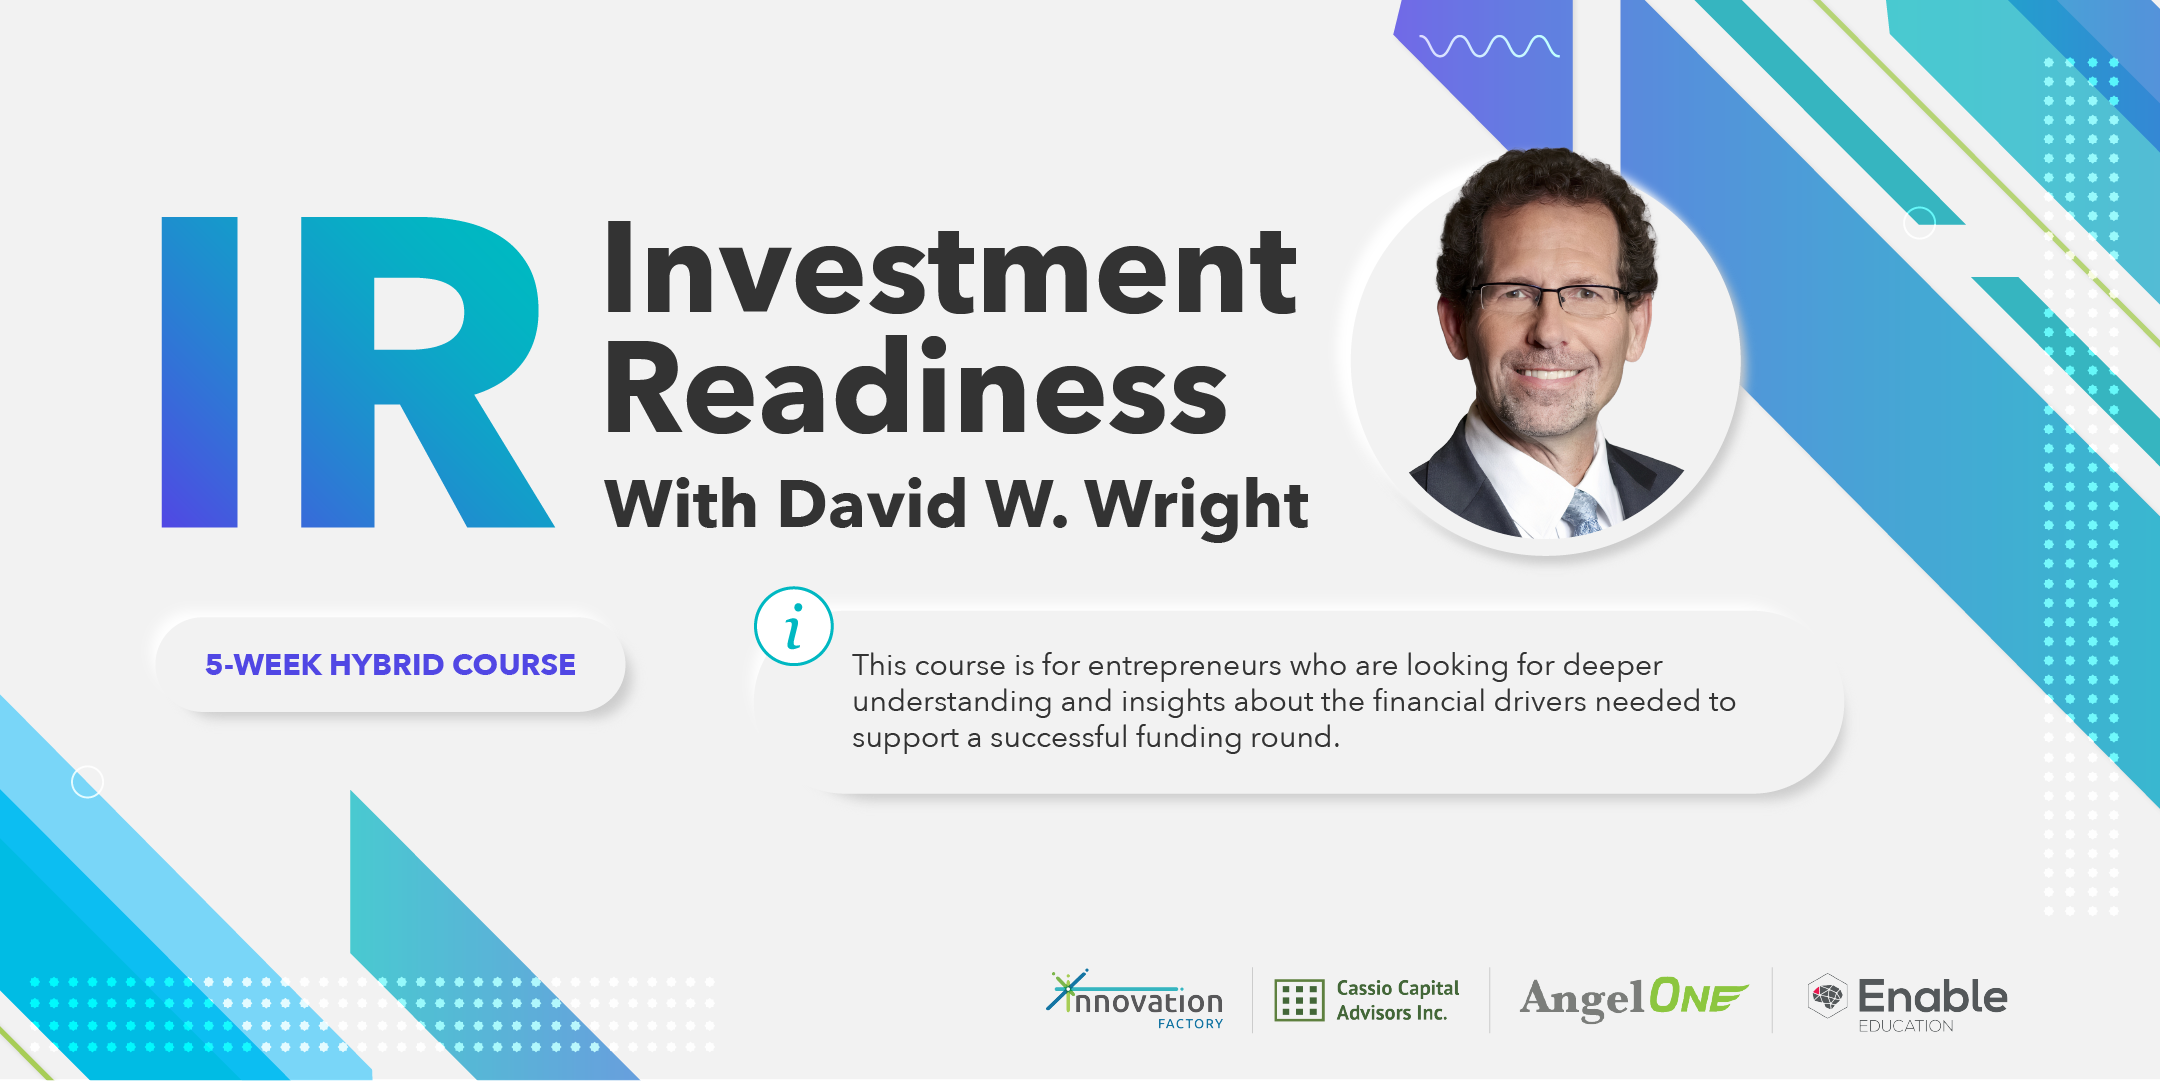 Investment Readiness with David Wright - 5 week hybrid course